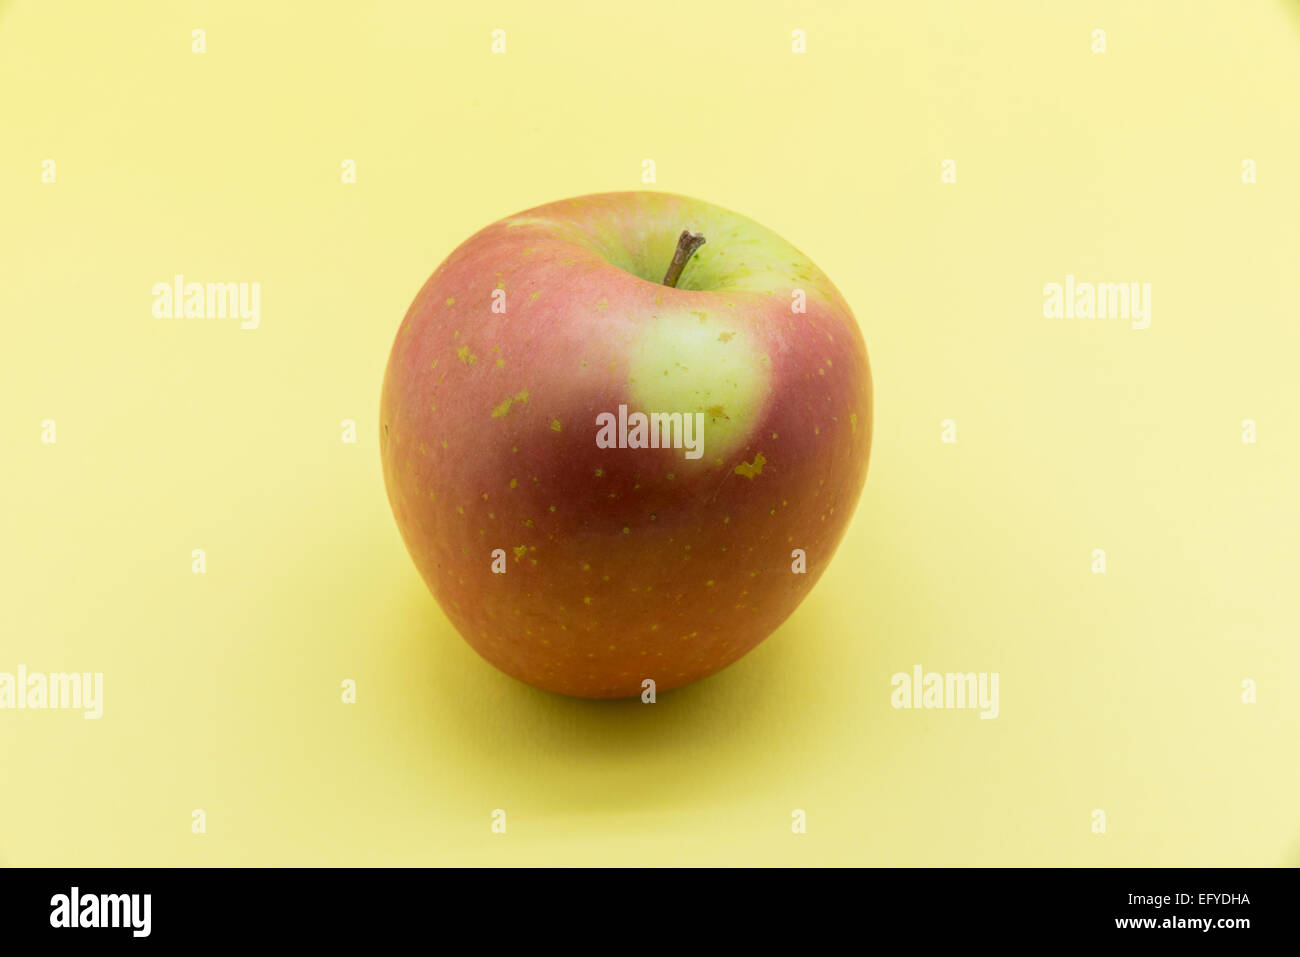 ripe apple on a yellow background Stock Photo